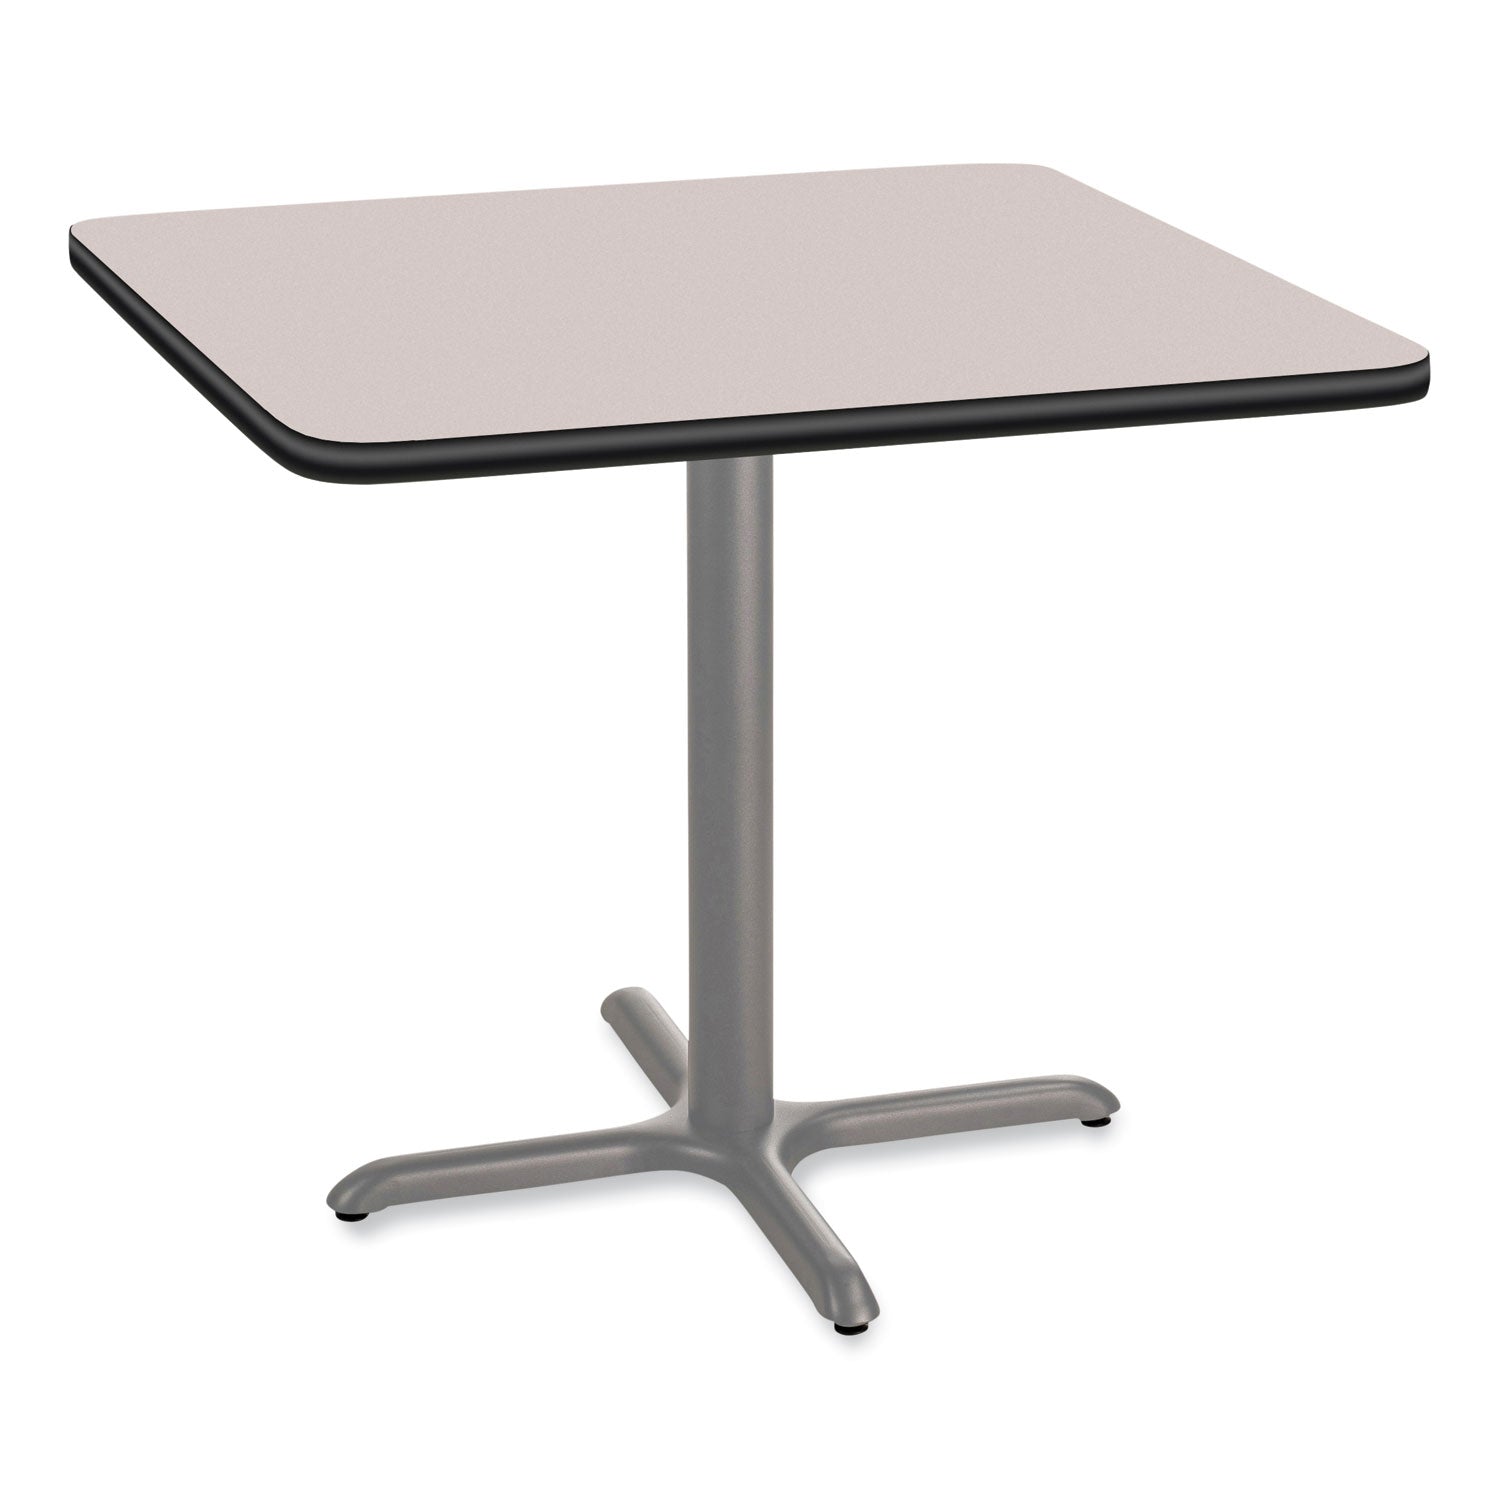 cafe-table-36w-x-36d-x-30h-square-top-x-base-gray-nebula-top-gray-base-ships-in-7-10-business-days_npscg33636xd1gy - 1